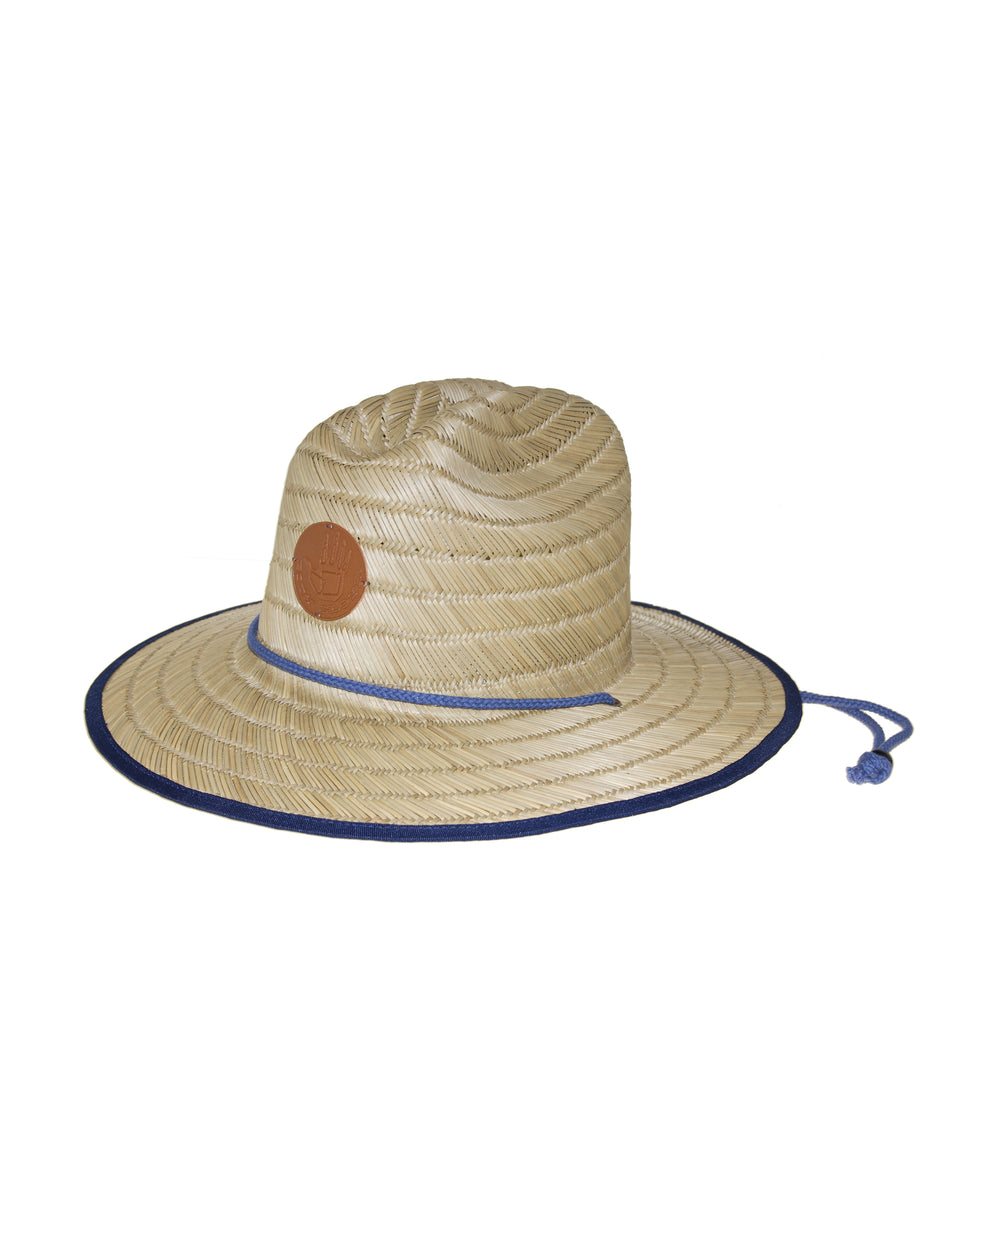 Straw Lifeguard Hat with Bungee Cord - Natural/Blue